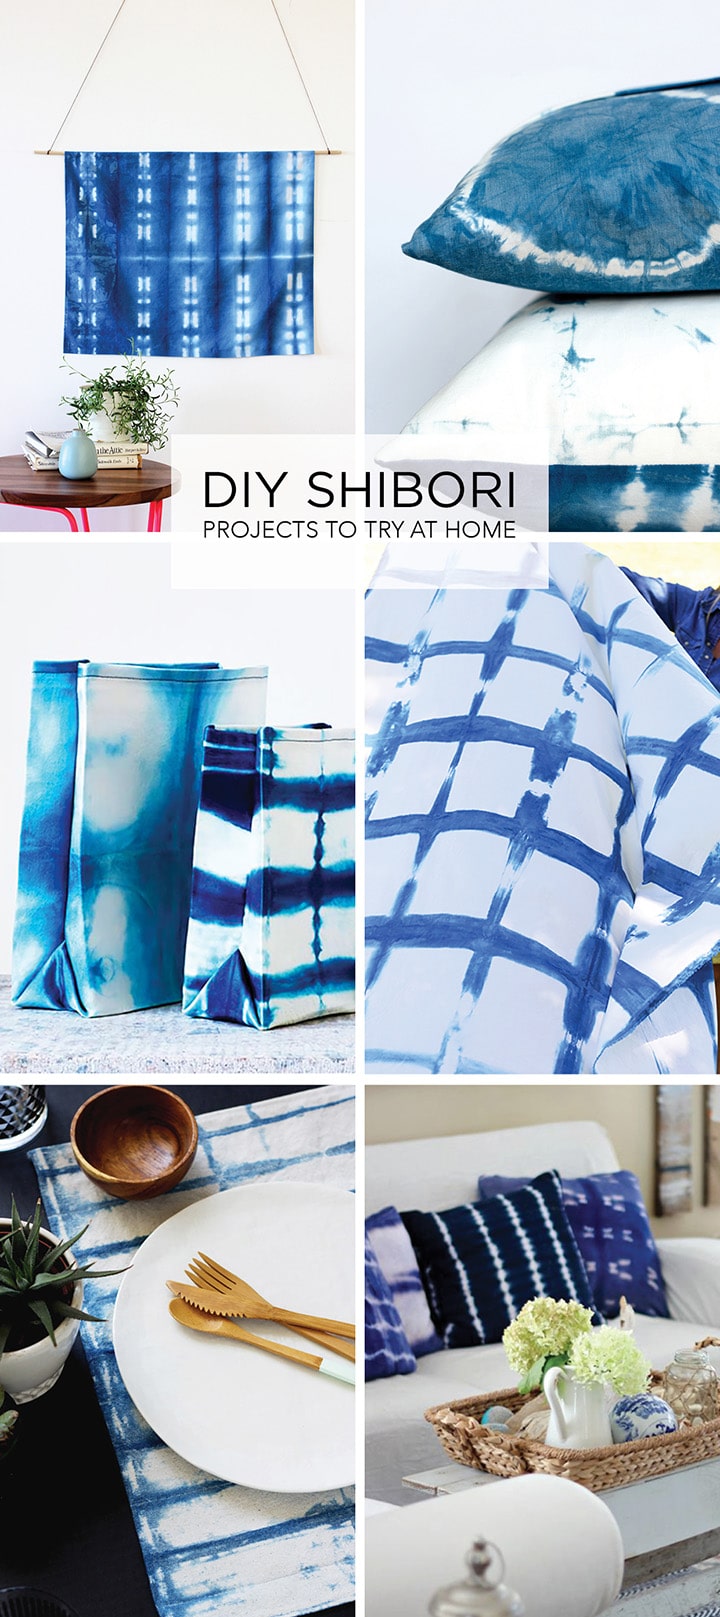 Some of the best DIY Shibori Indigo Projects to try at home.